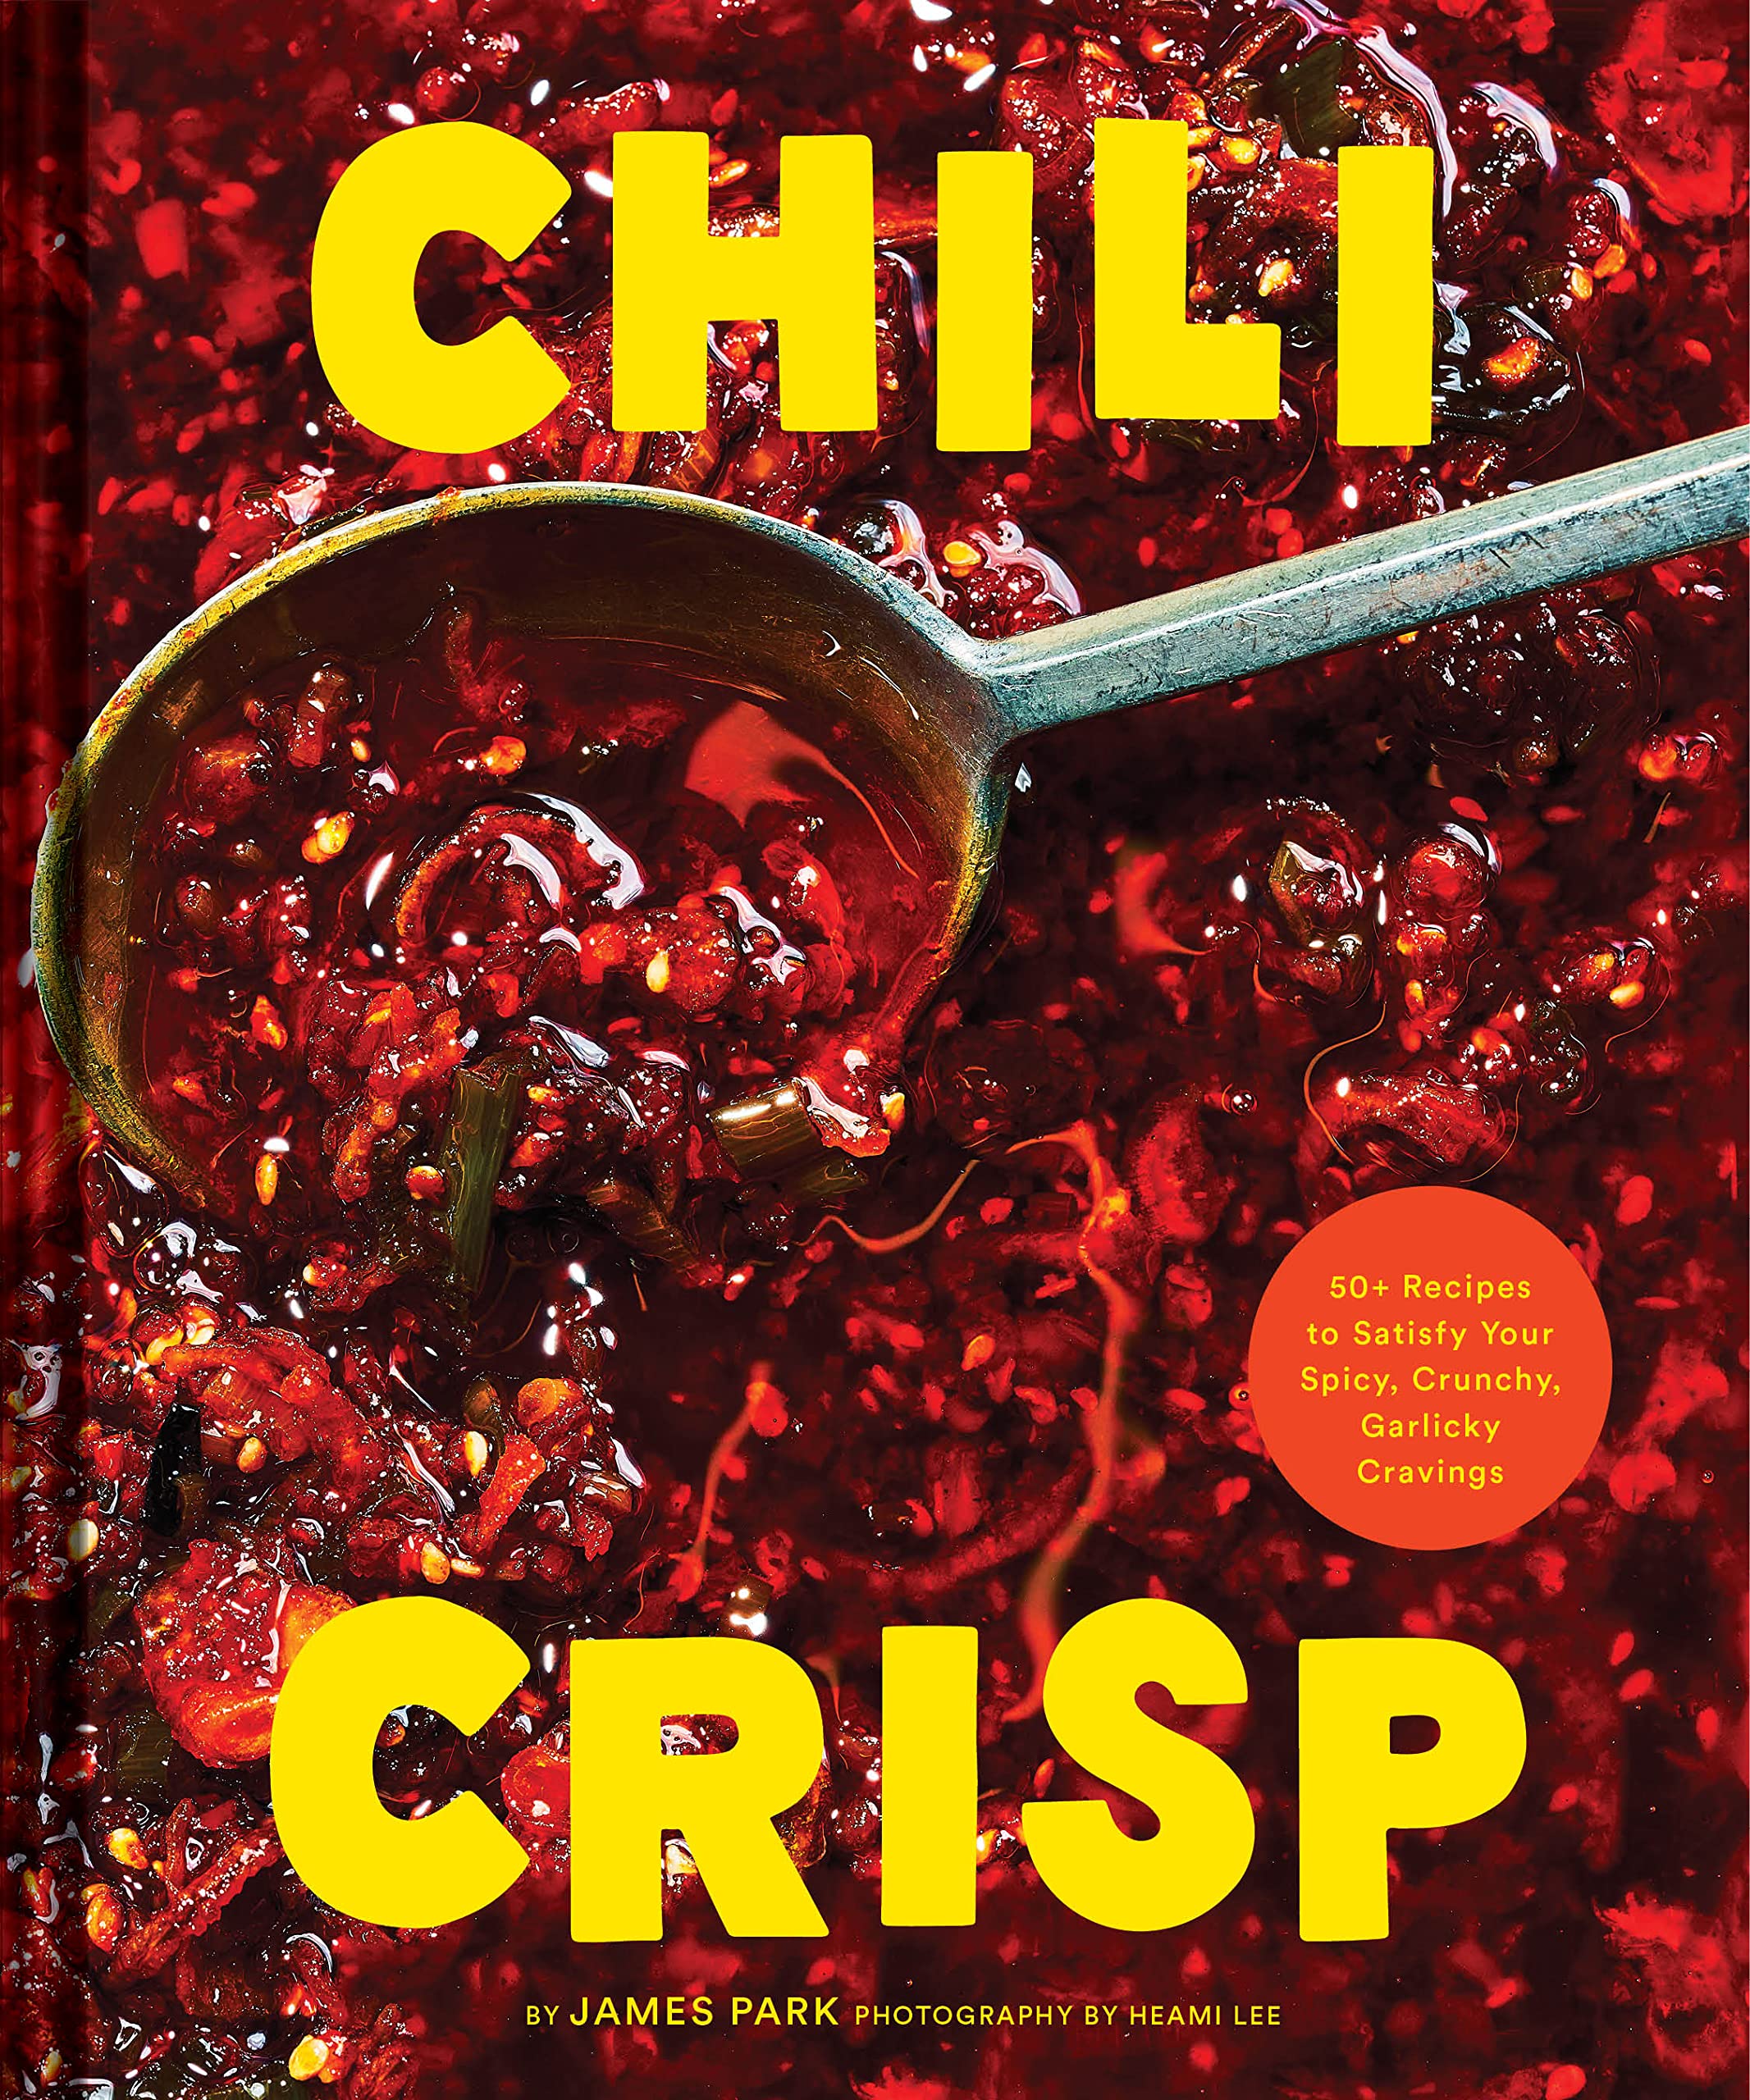 Chili Crisp: 50+ Recipes to Satisfy Your Spicy, Crunchy, Garlicky Cravings (James Park and Heami Lee)